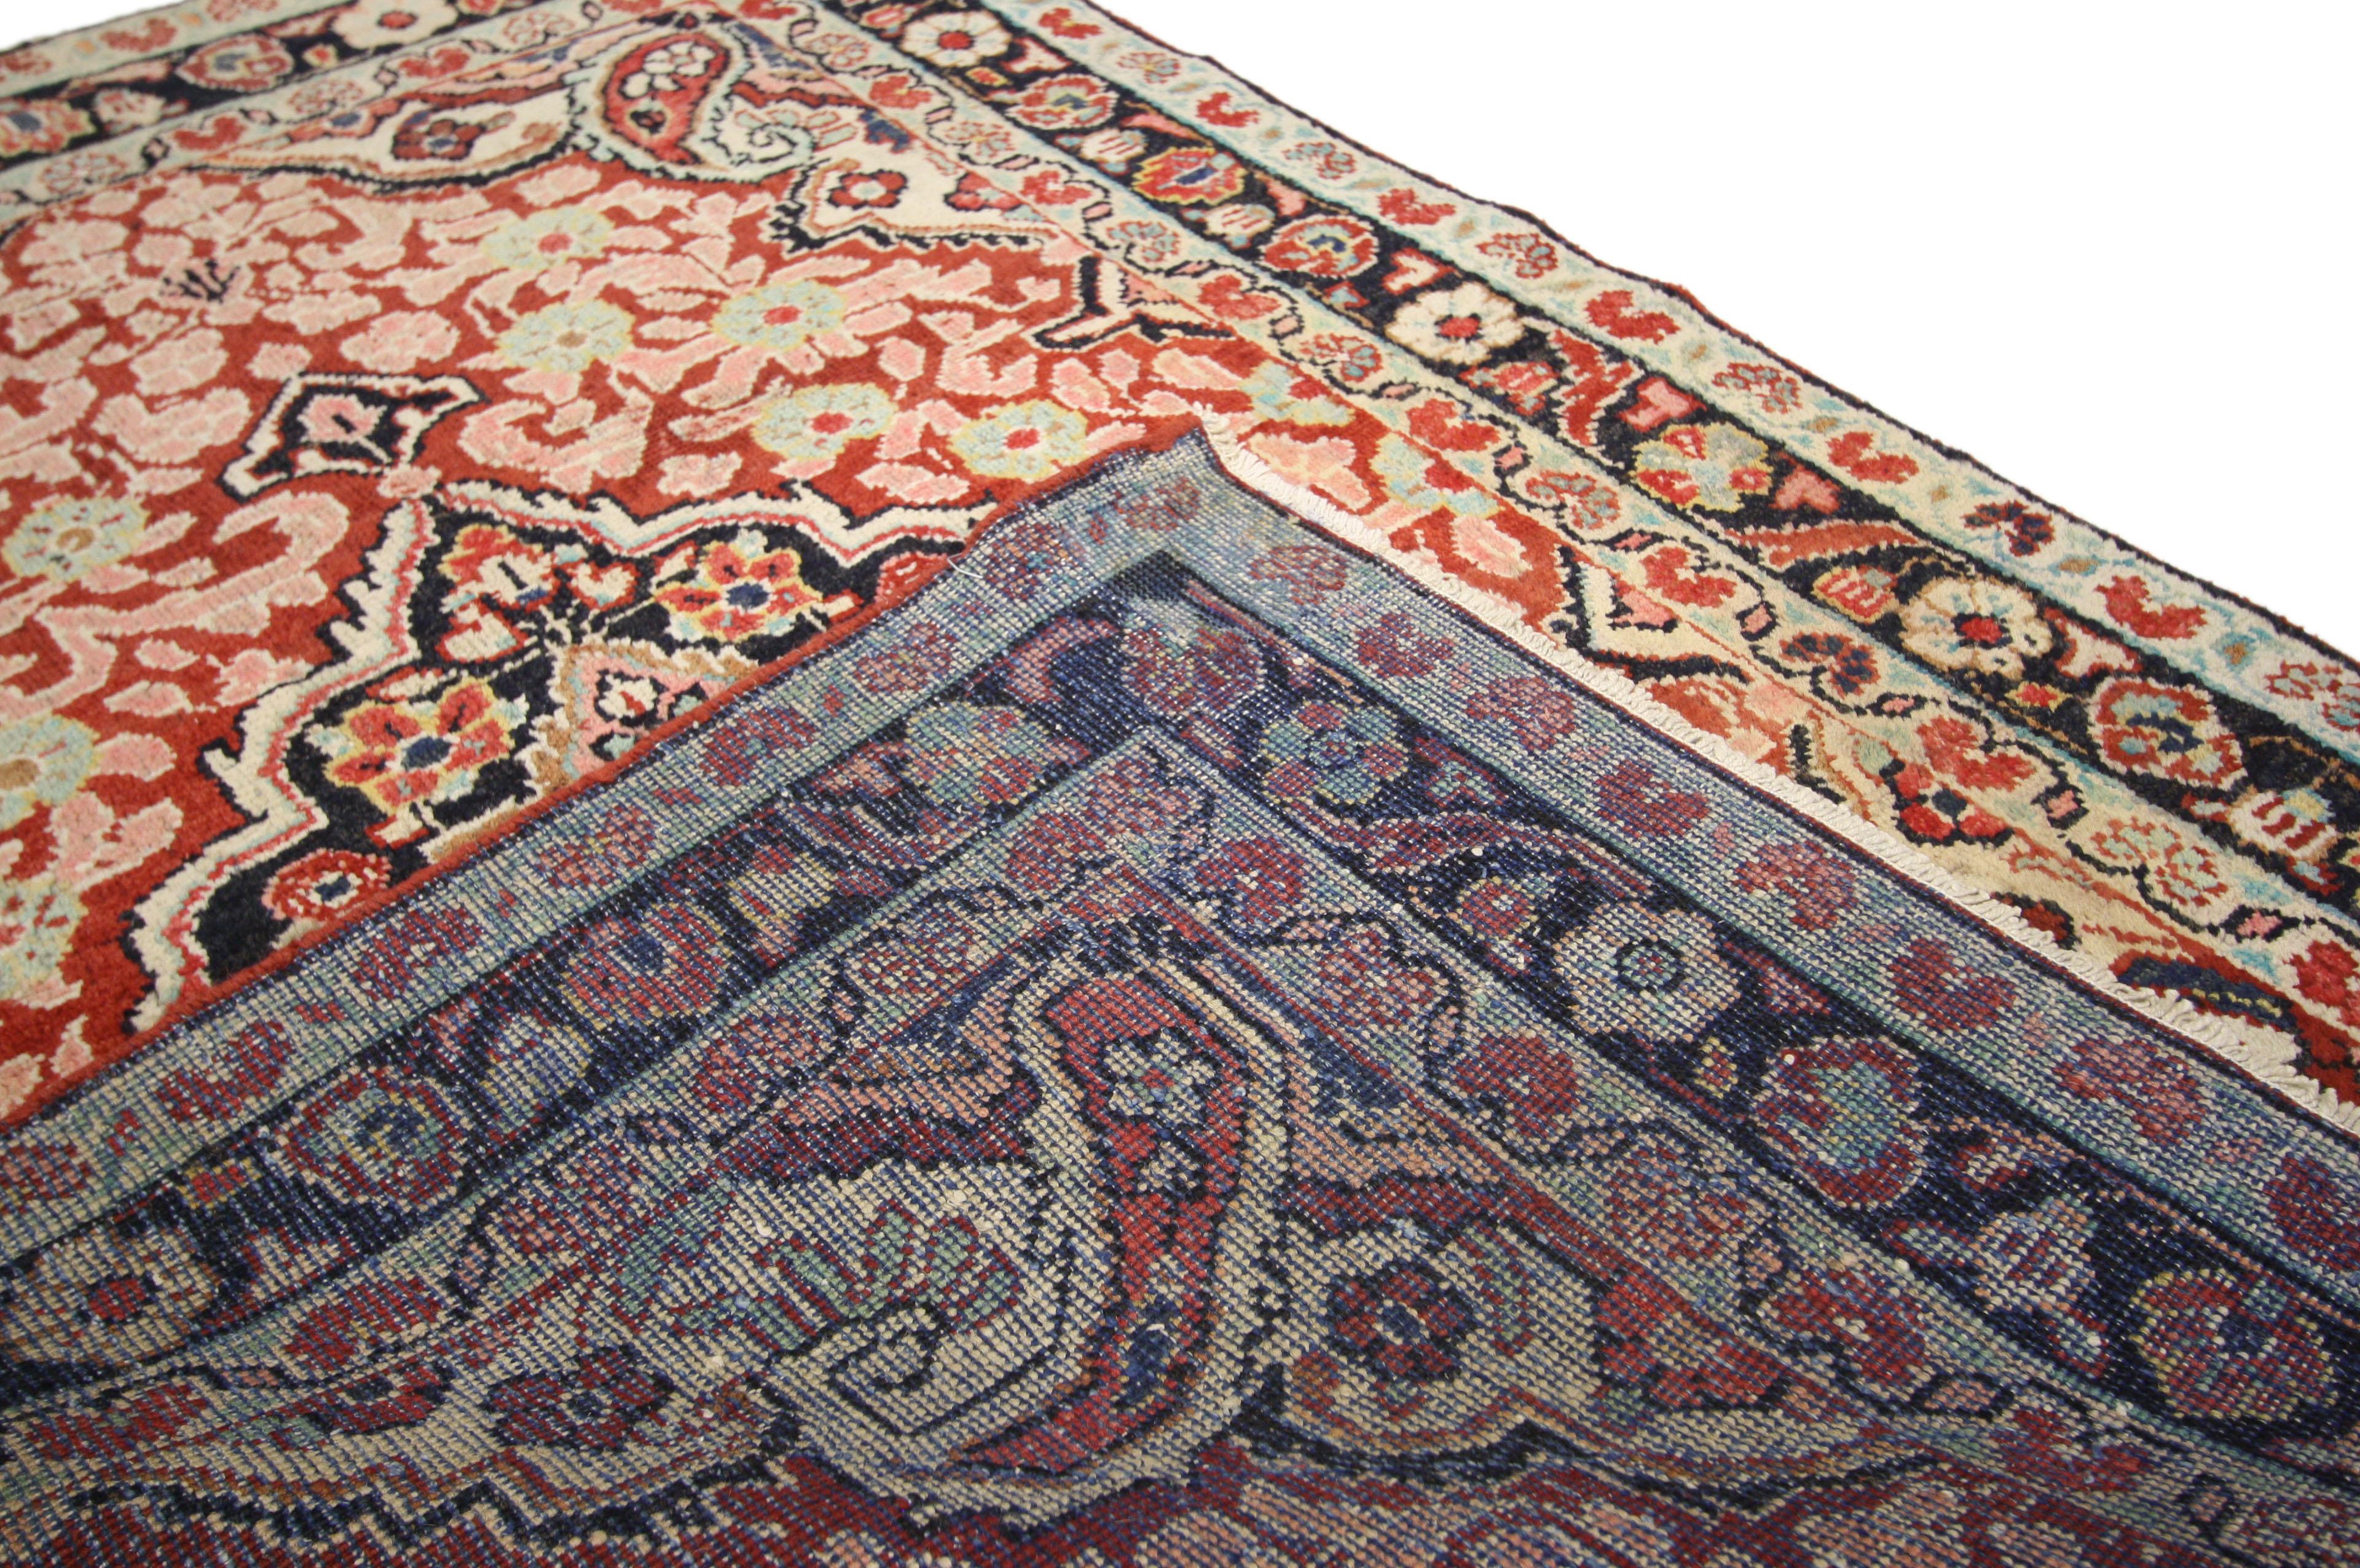 Vintage Persian Mahal Accent Rug with Traditional Victorian Style In Good Condition For Sale In Dallas, TX